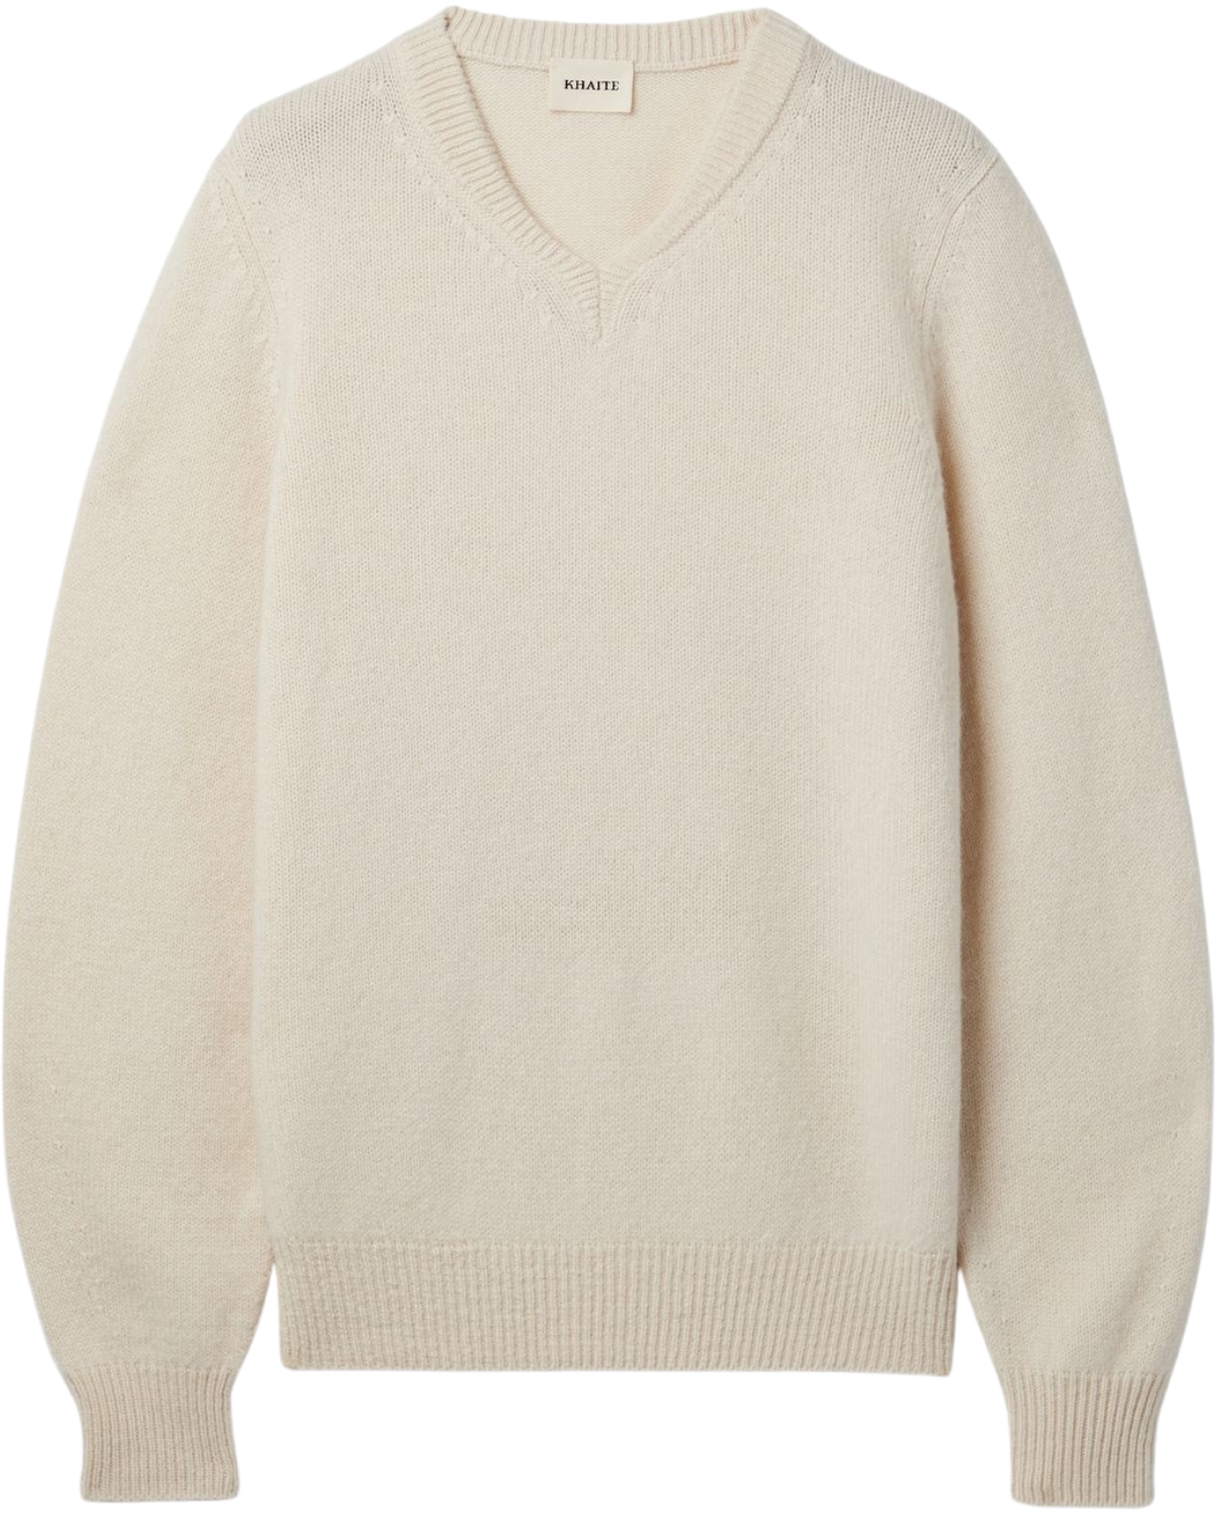 The Waverly Sweater